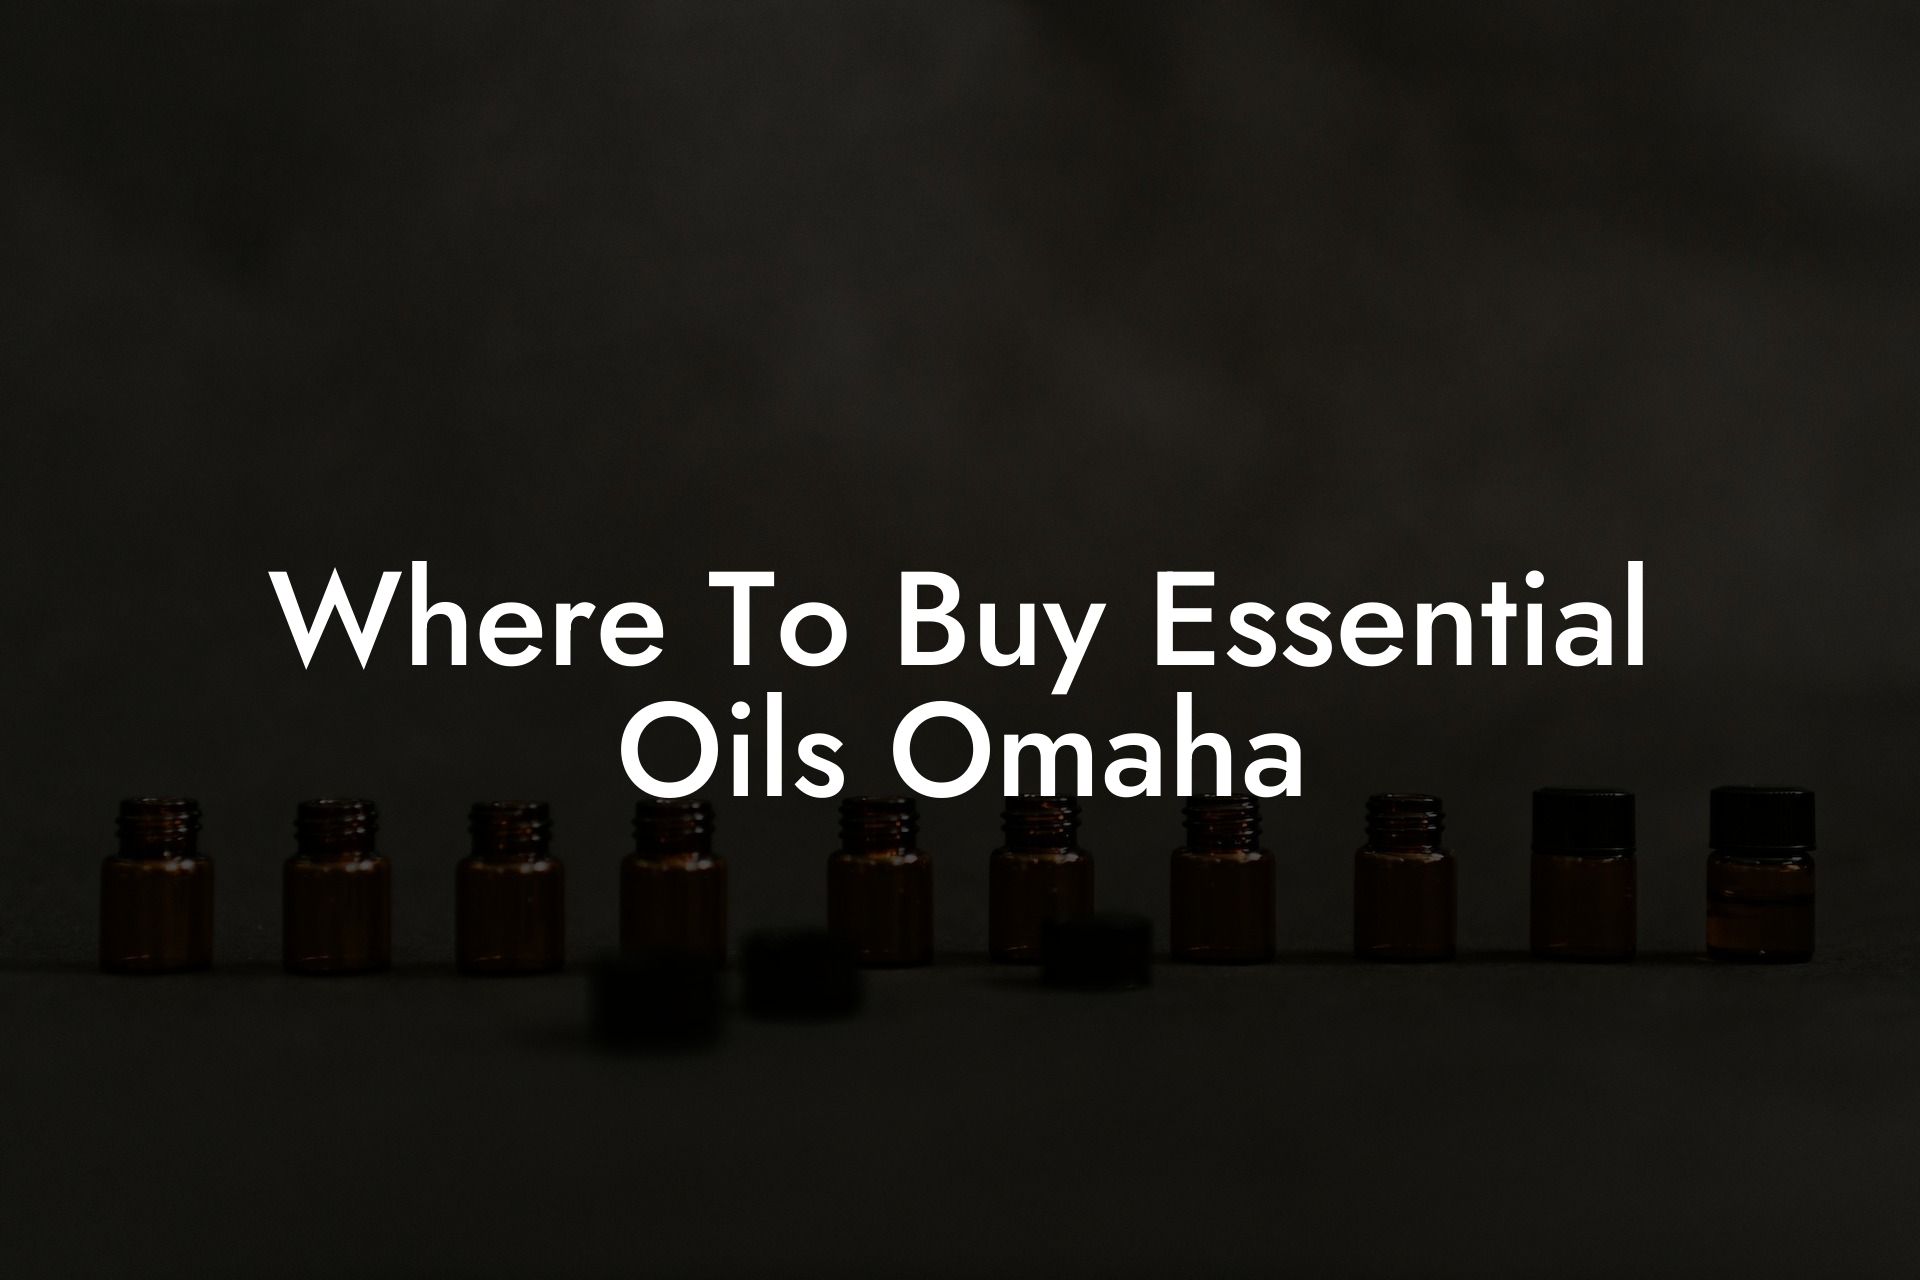 Where To Buy Essential Oils Omaha